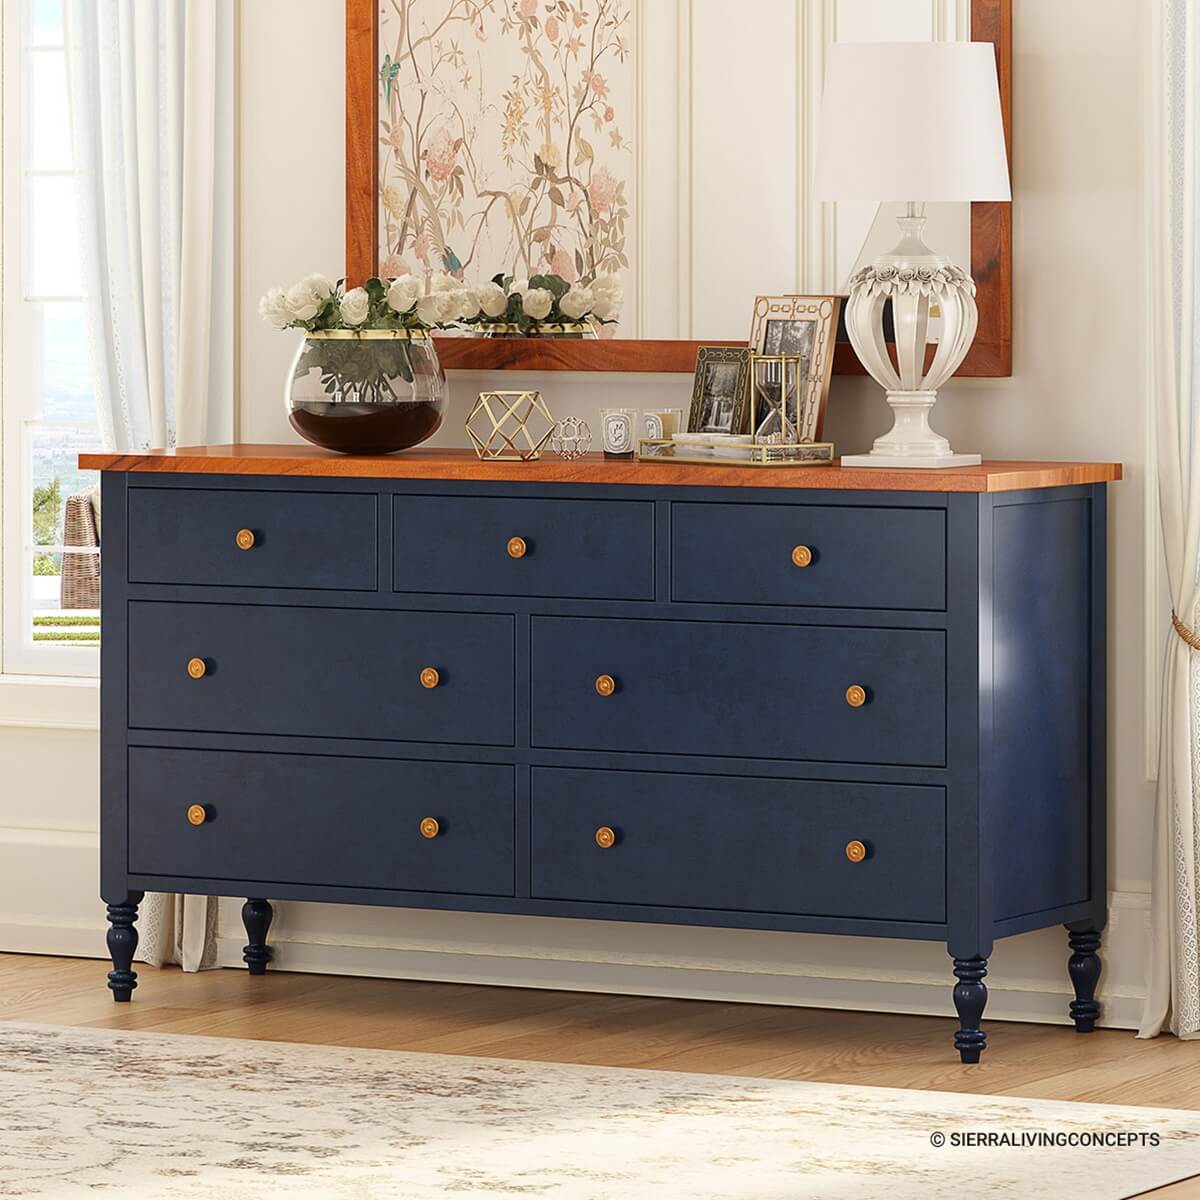 https://www.sierralivingconcepts.com/images/thumbs/0406237_repton-blue-two-tone-solid-wood-7-drawer-bedroom-dresser.jpeg